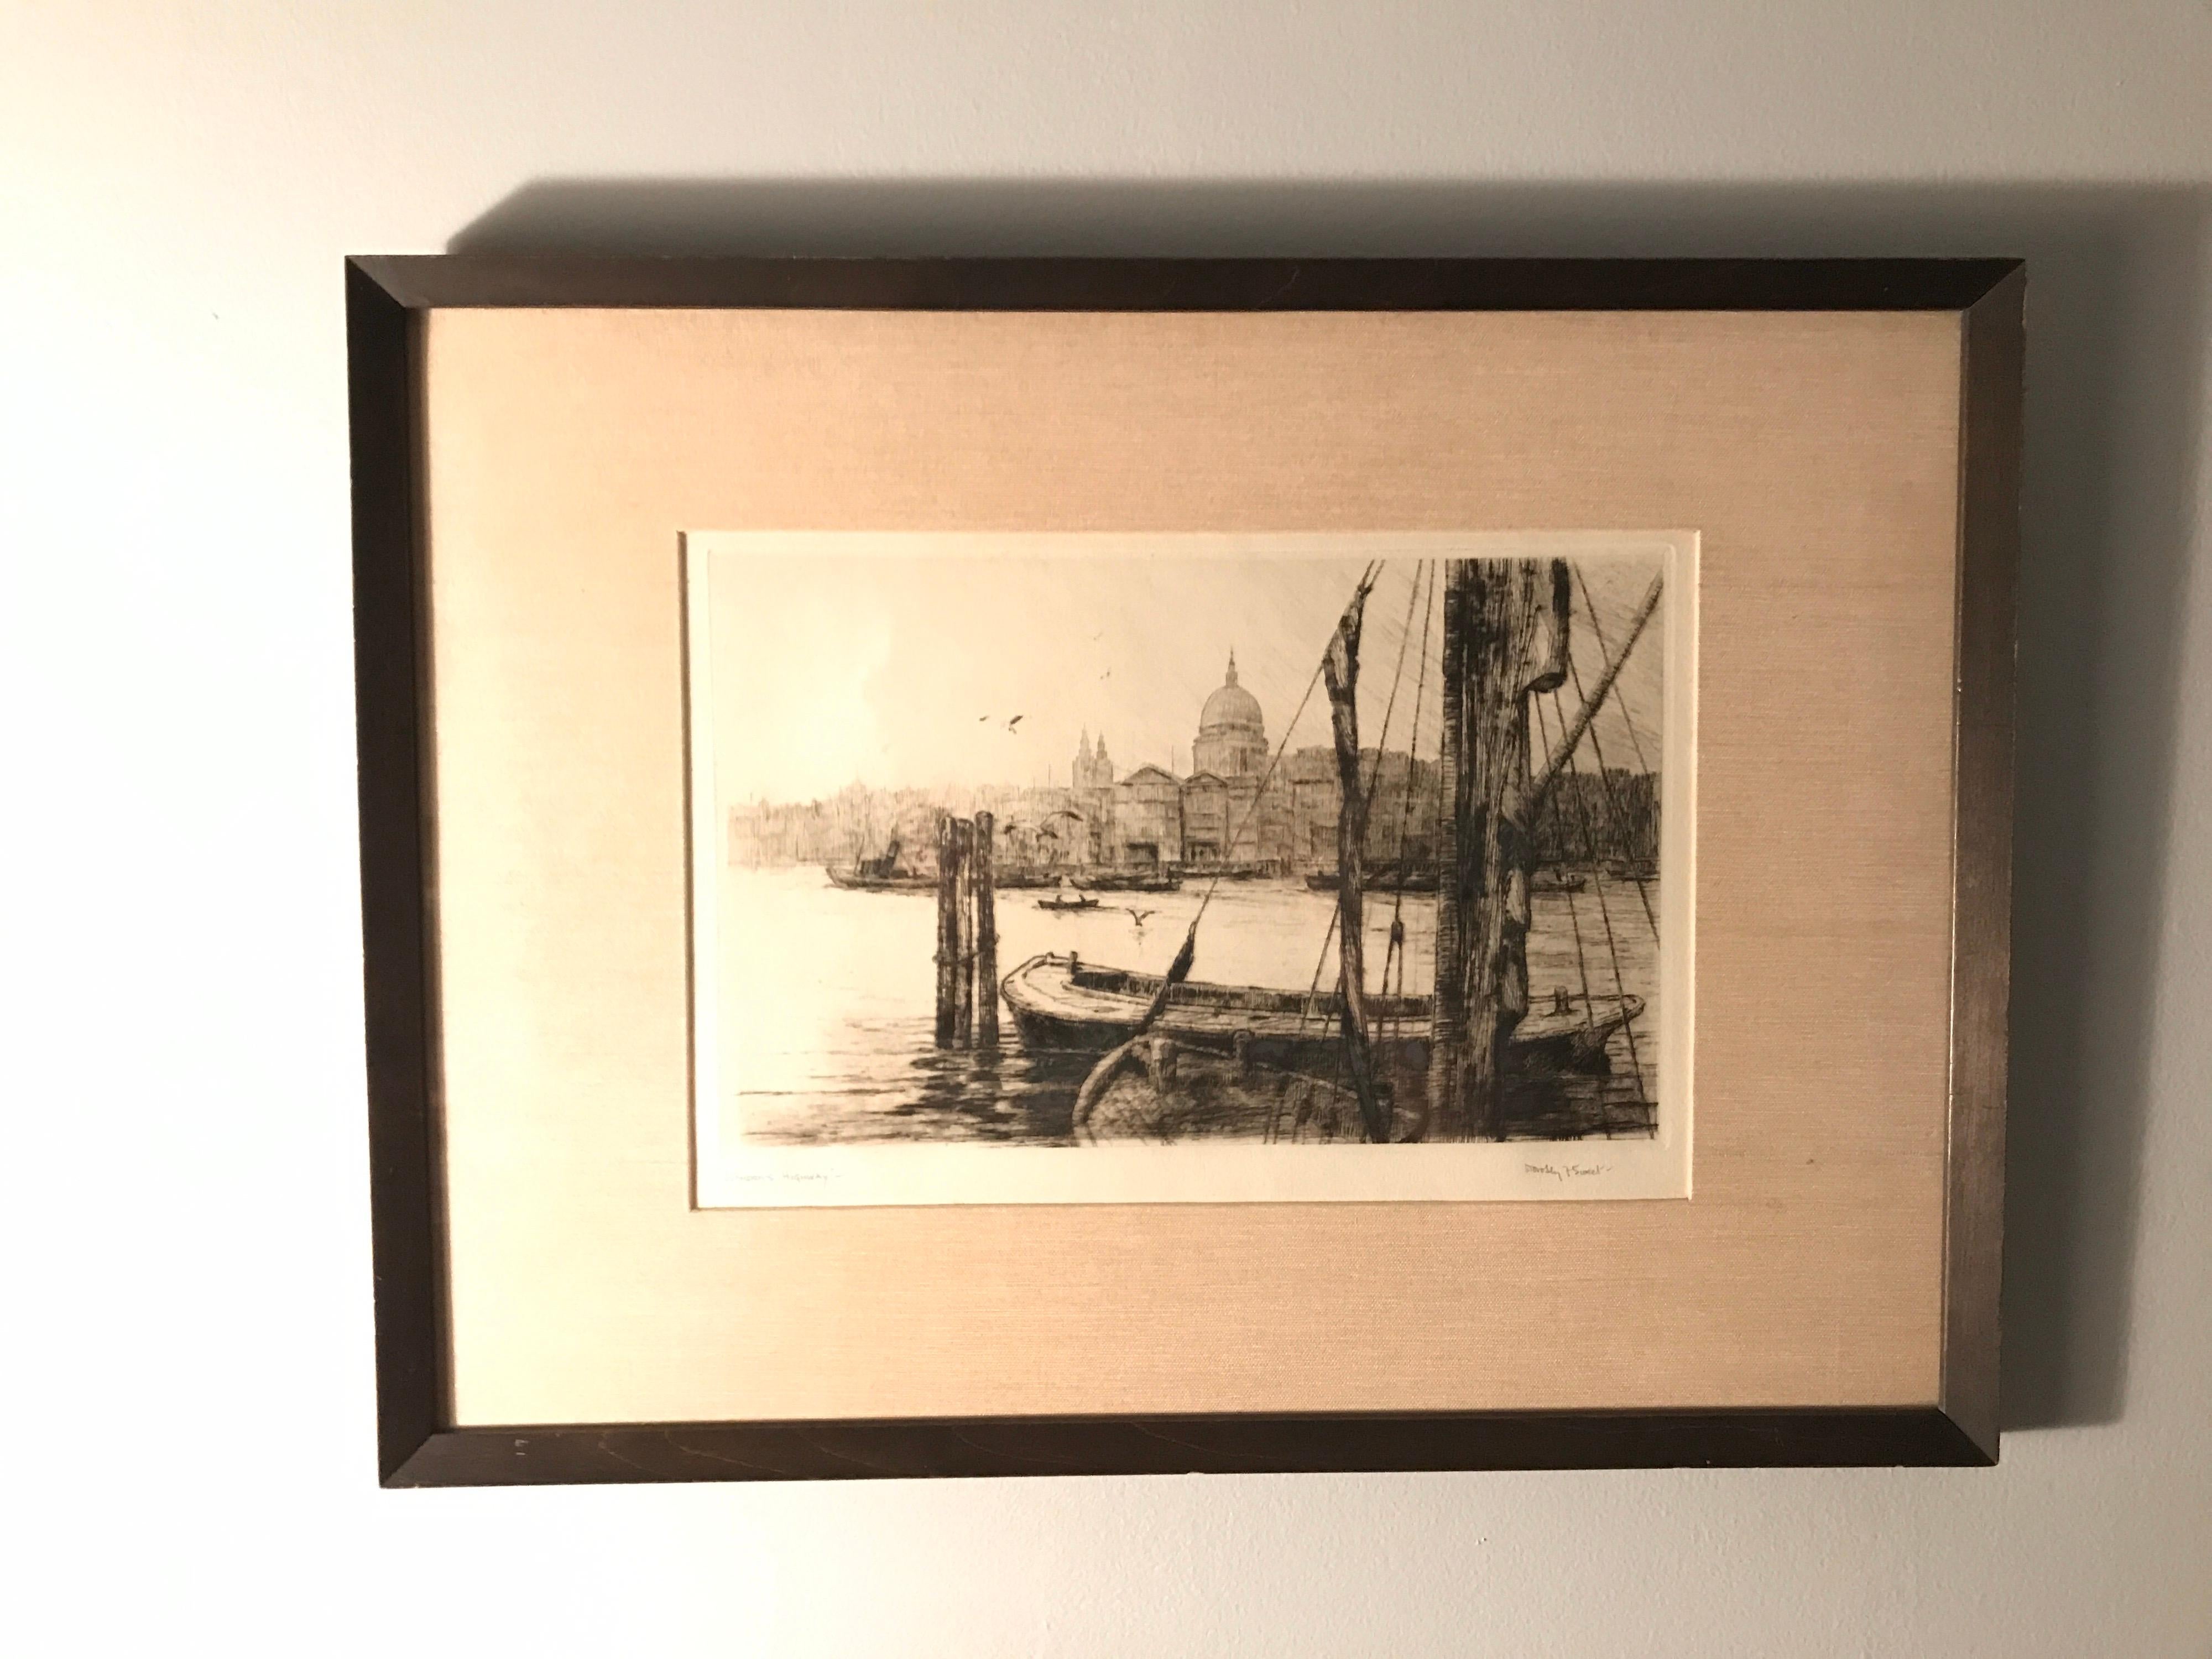 Early 20th C Signed Dorothy Sweet Etchings, “London’s Highway” and ”Tower of London” sold as a pair. Artwork on etching paper from the early 1900's, signed by artist on both pieces, matted and framed. 12”x 16” frames.